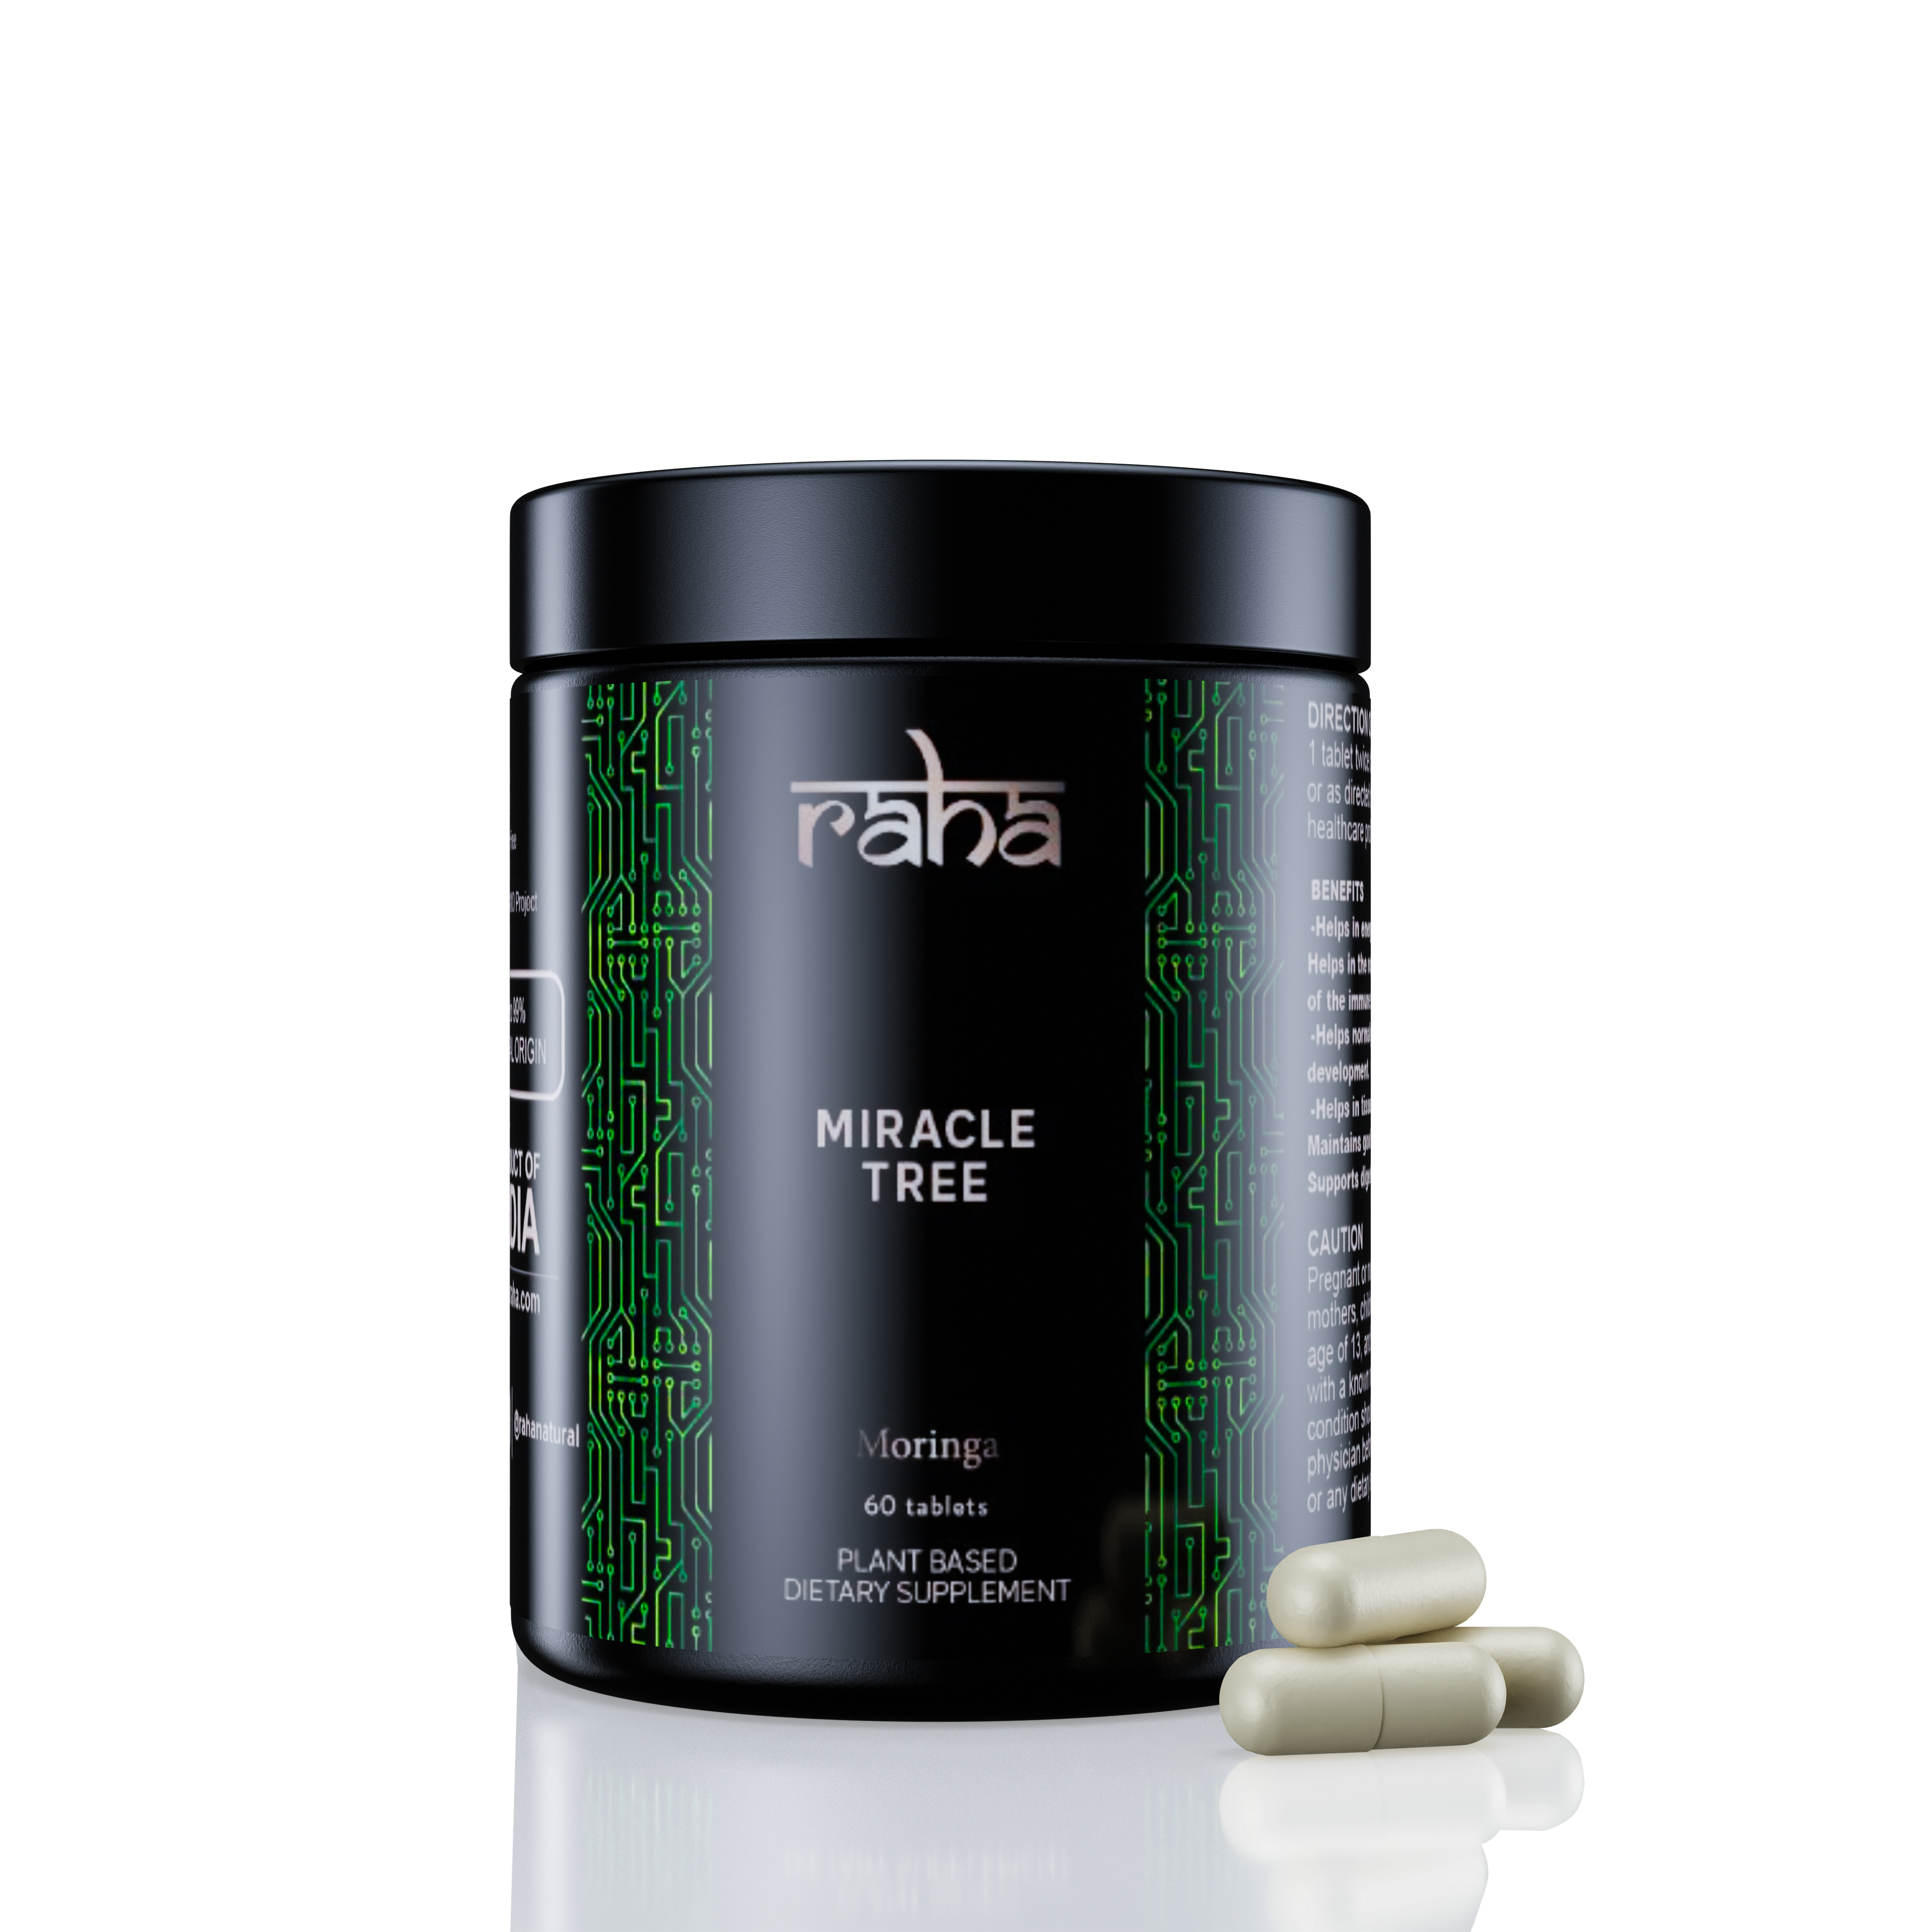 Raha miracle tree for improving overall health, improving digestion and enhancing energy levels